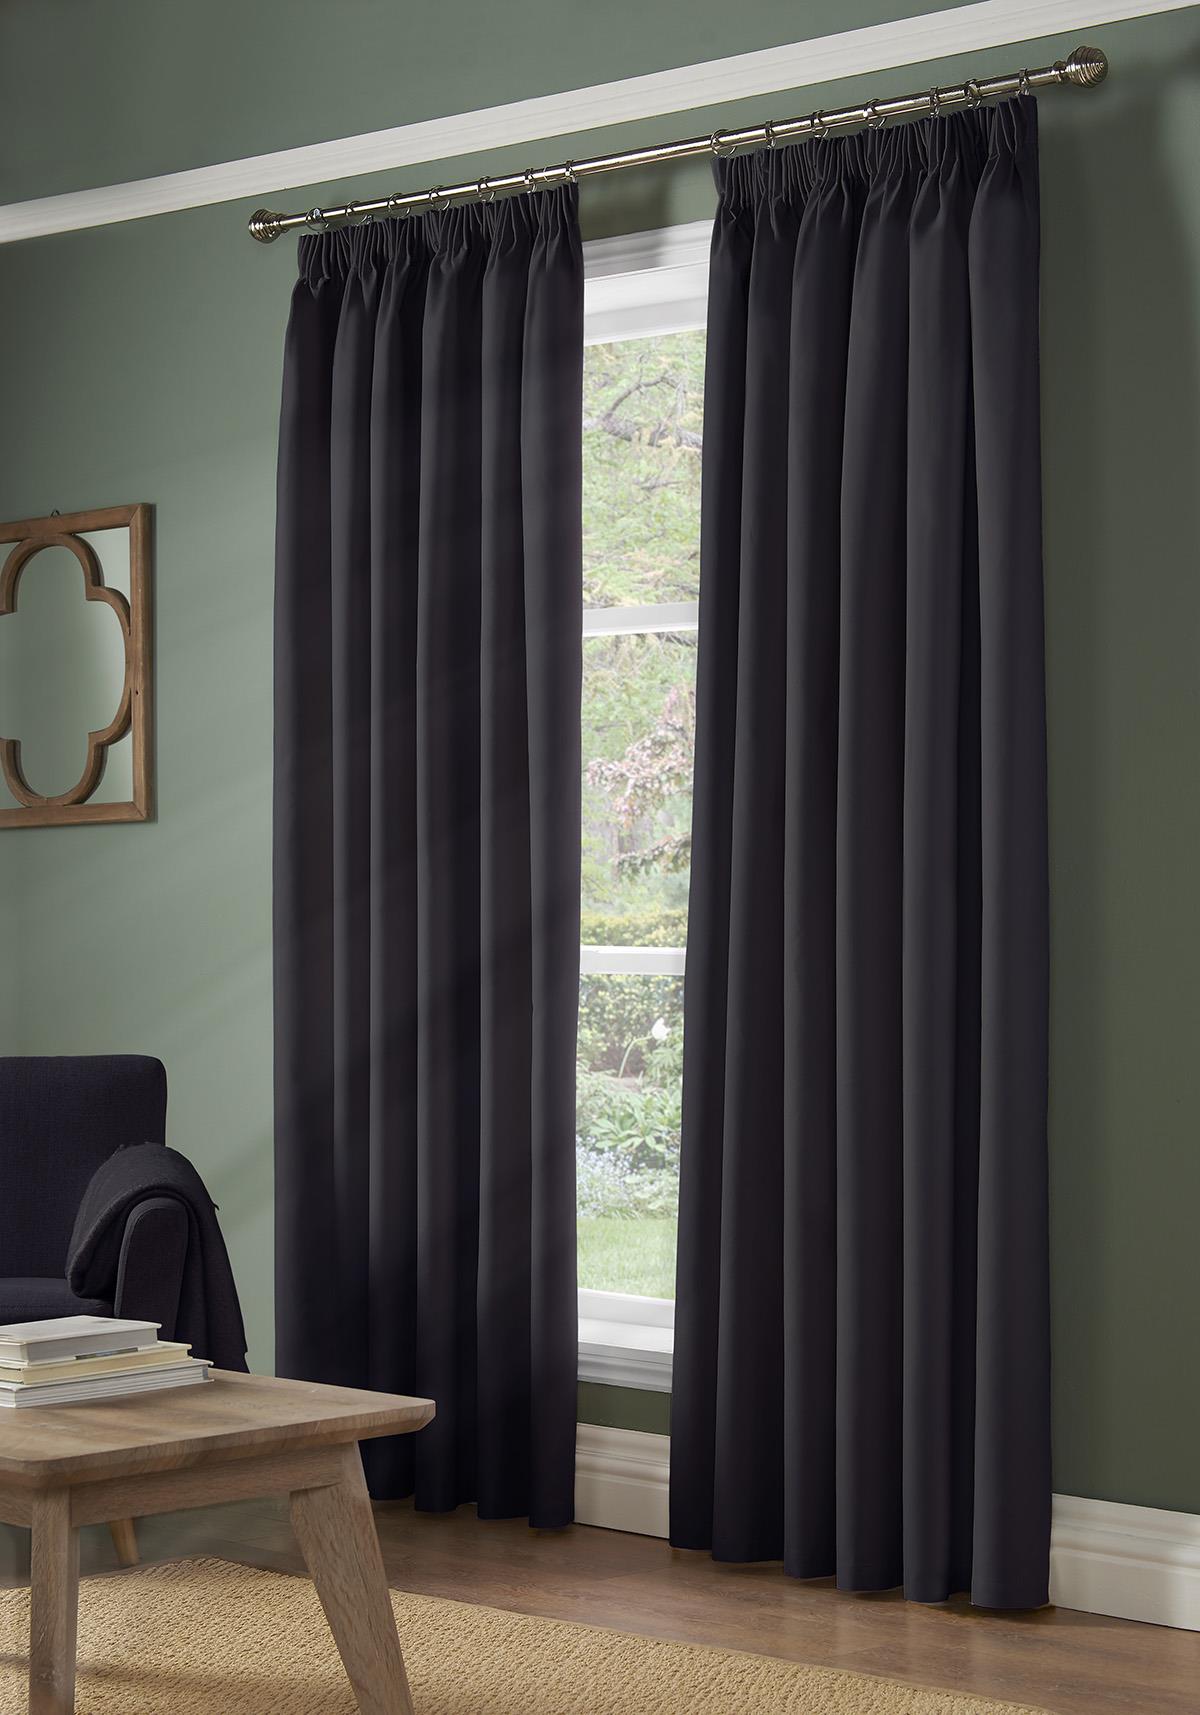 Charcoal 100% Blackout Thermal Taped Curtains - Pair